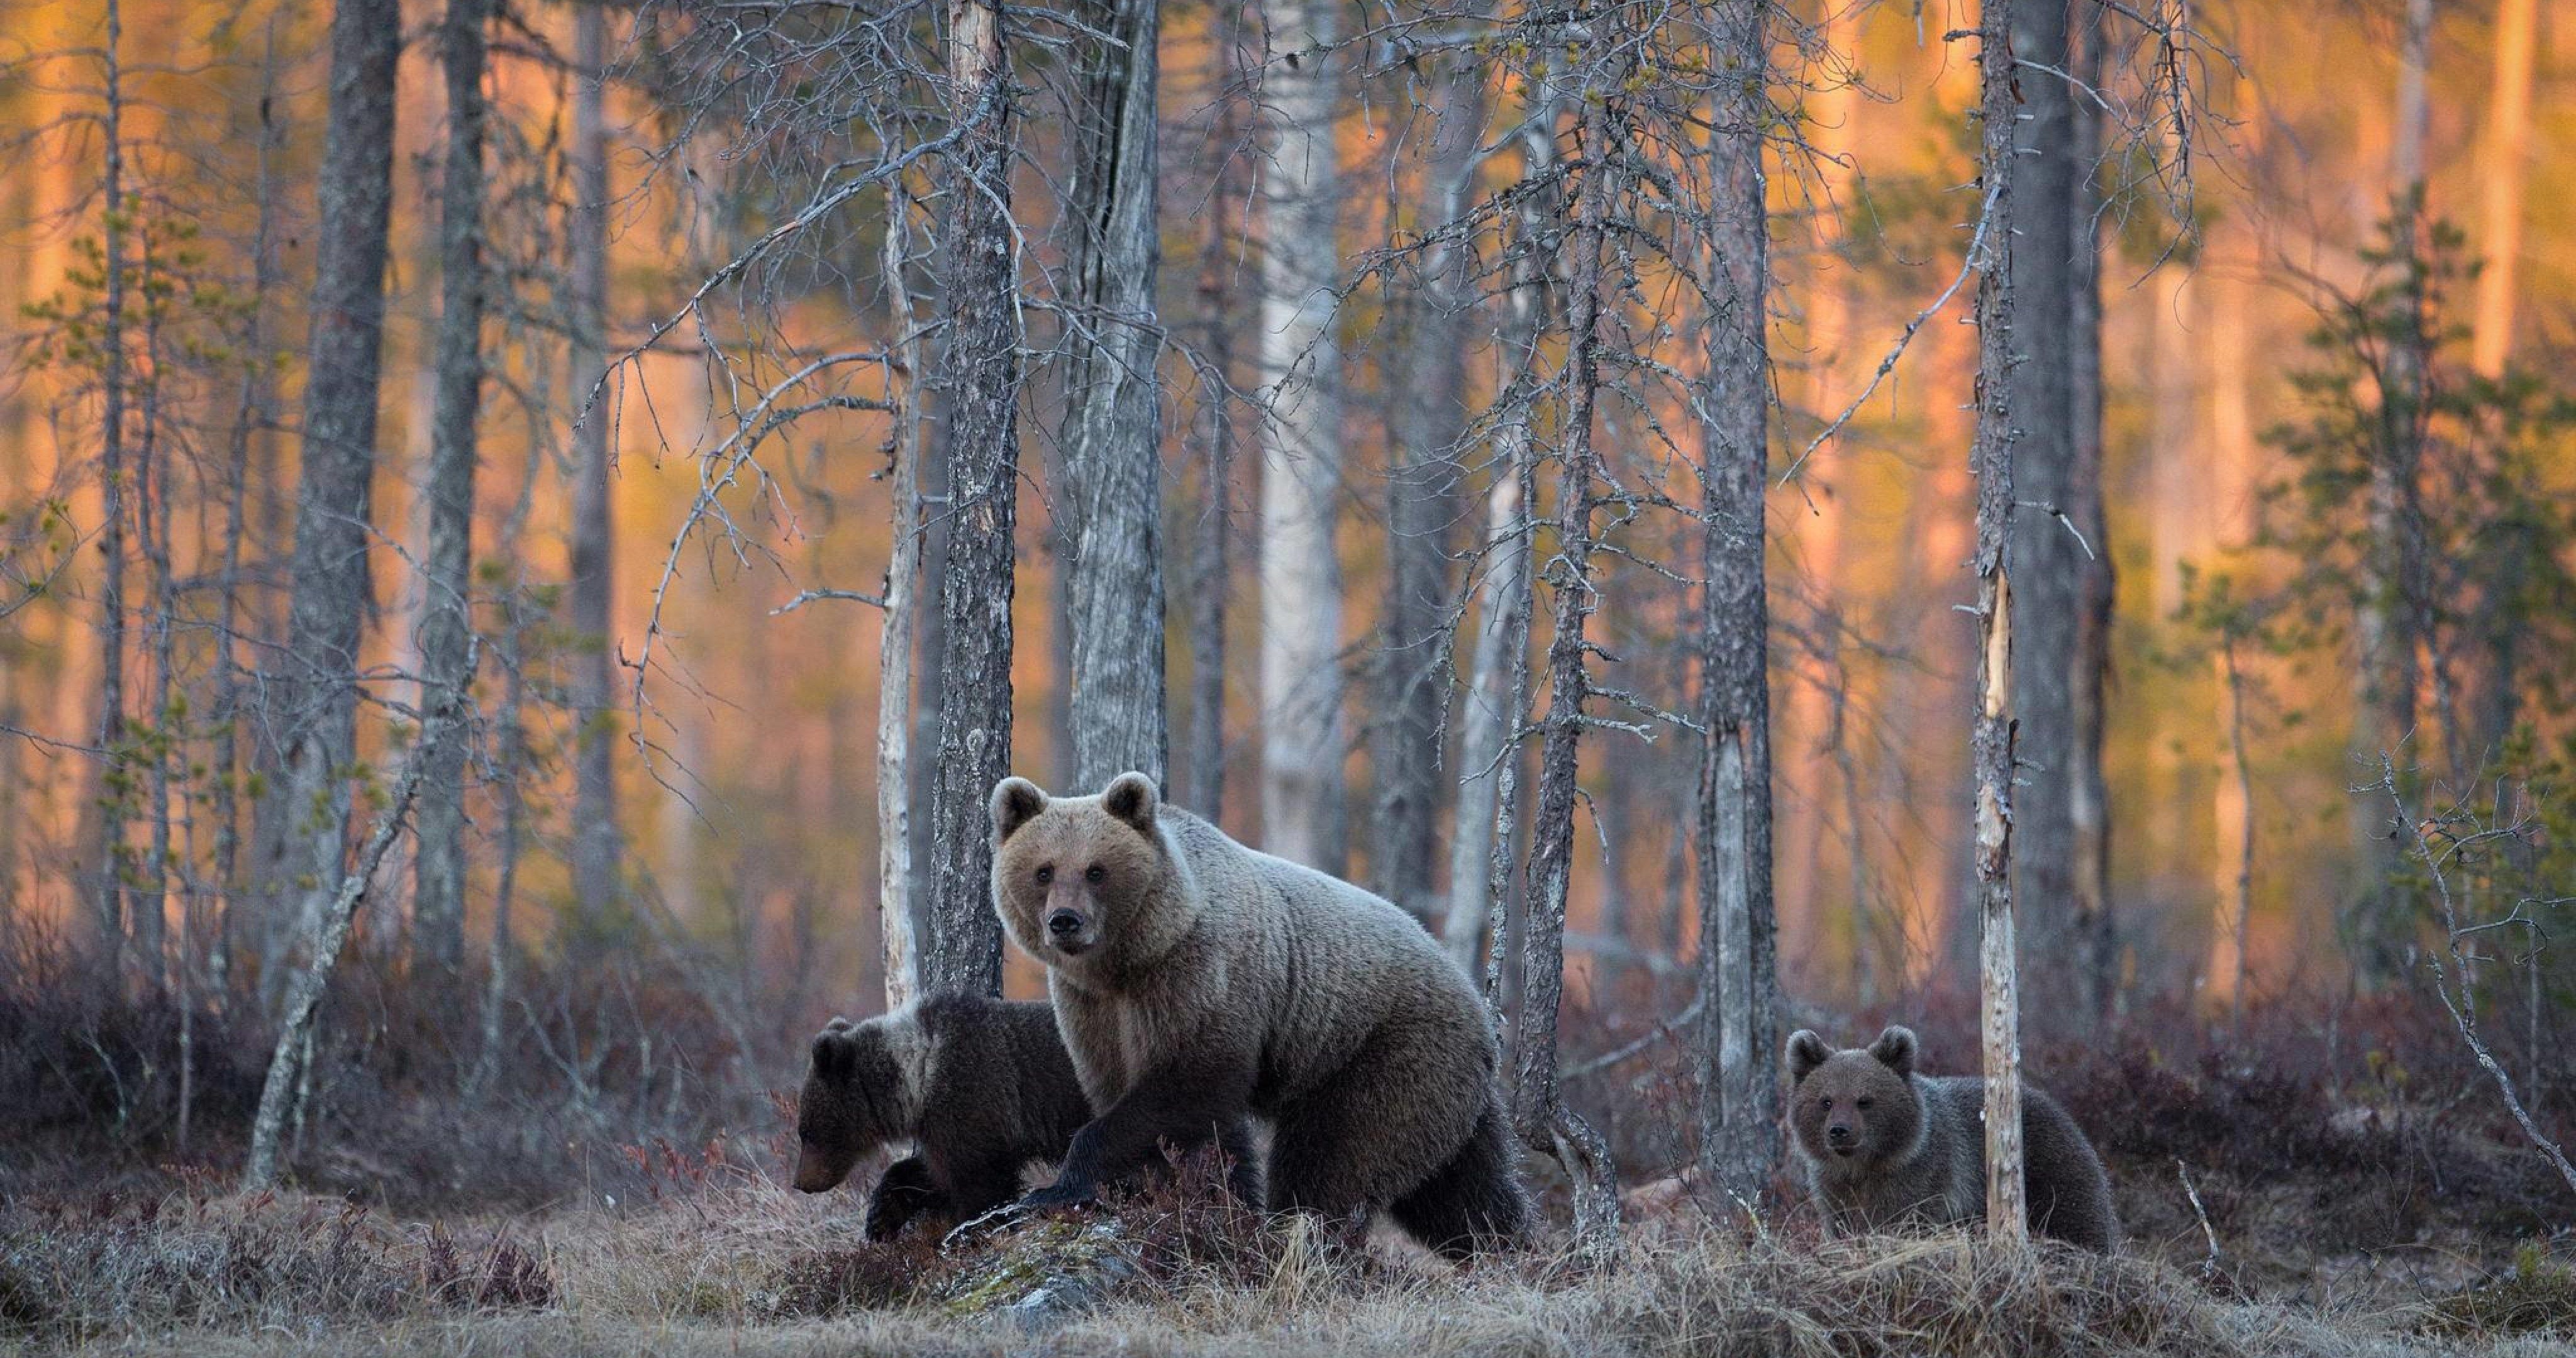 bears in forest 4k ultra HD wallpaper High quality walls